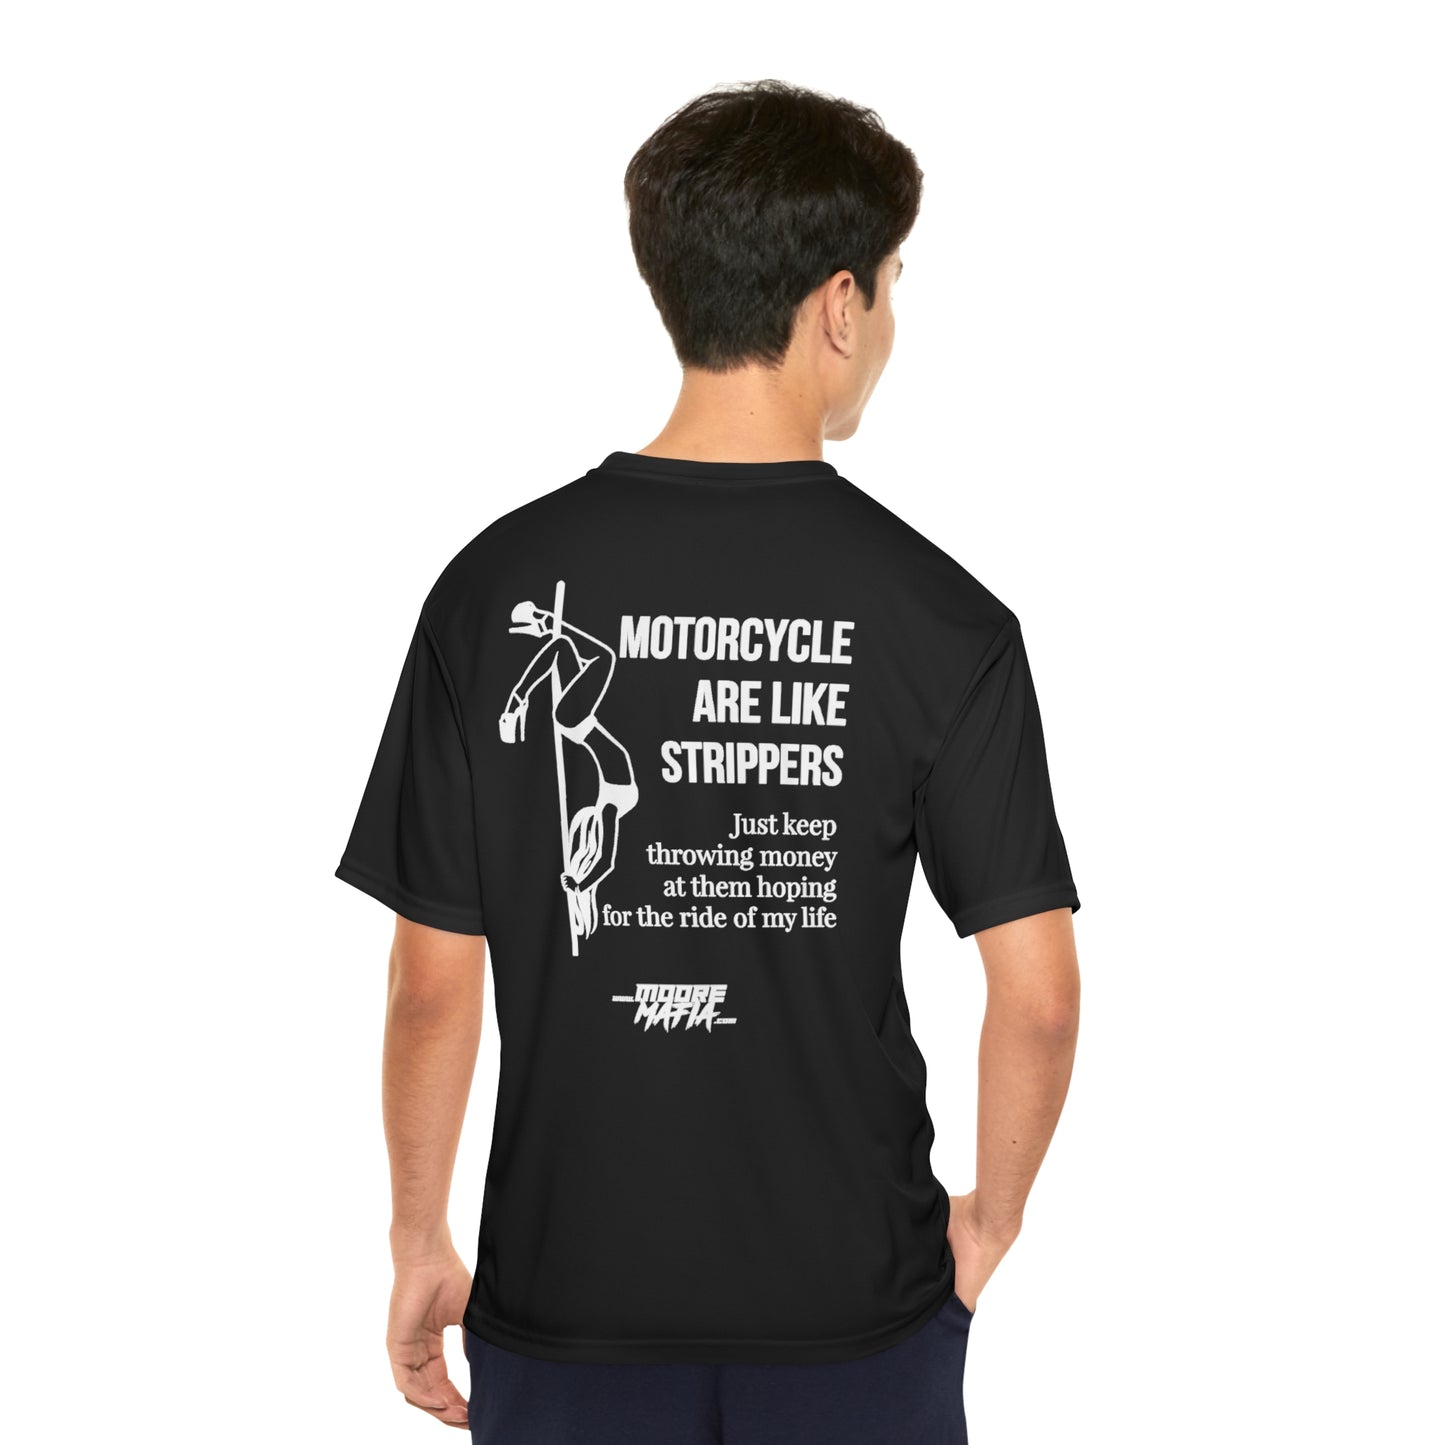 Motorcycles Are Like Stippers Performance T-Shirt